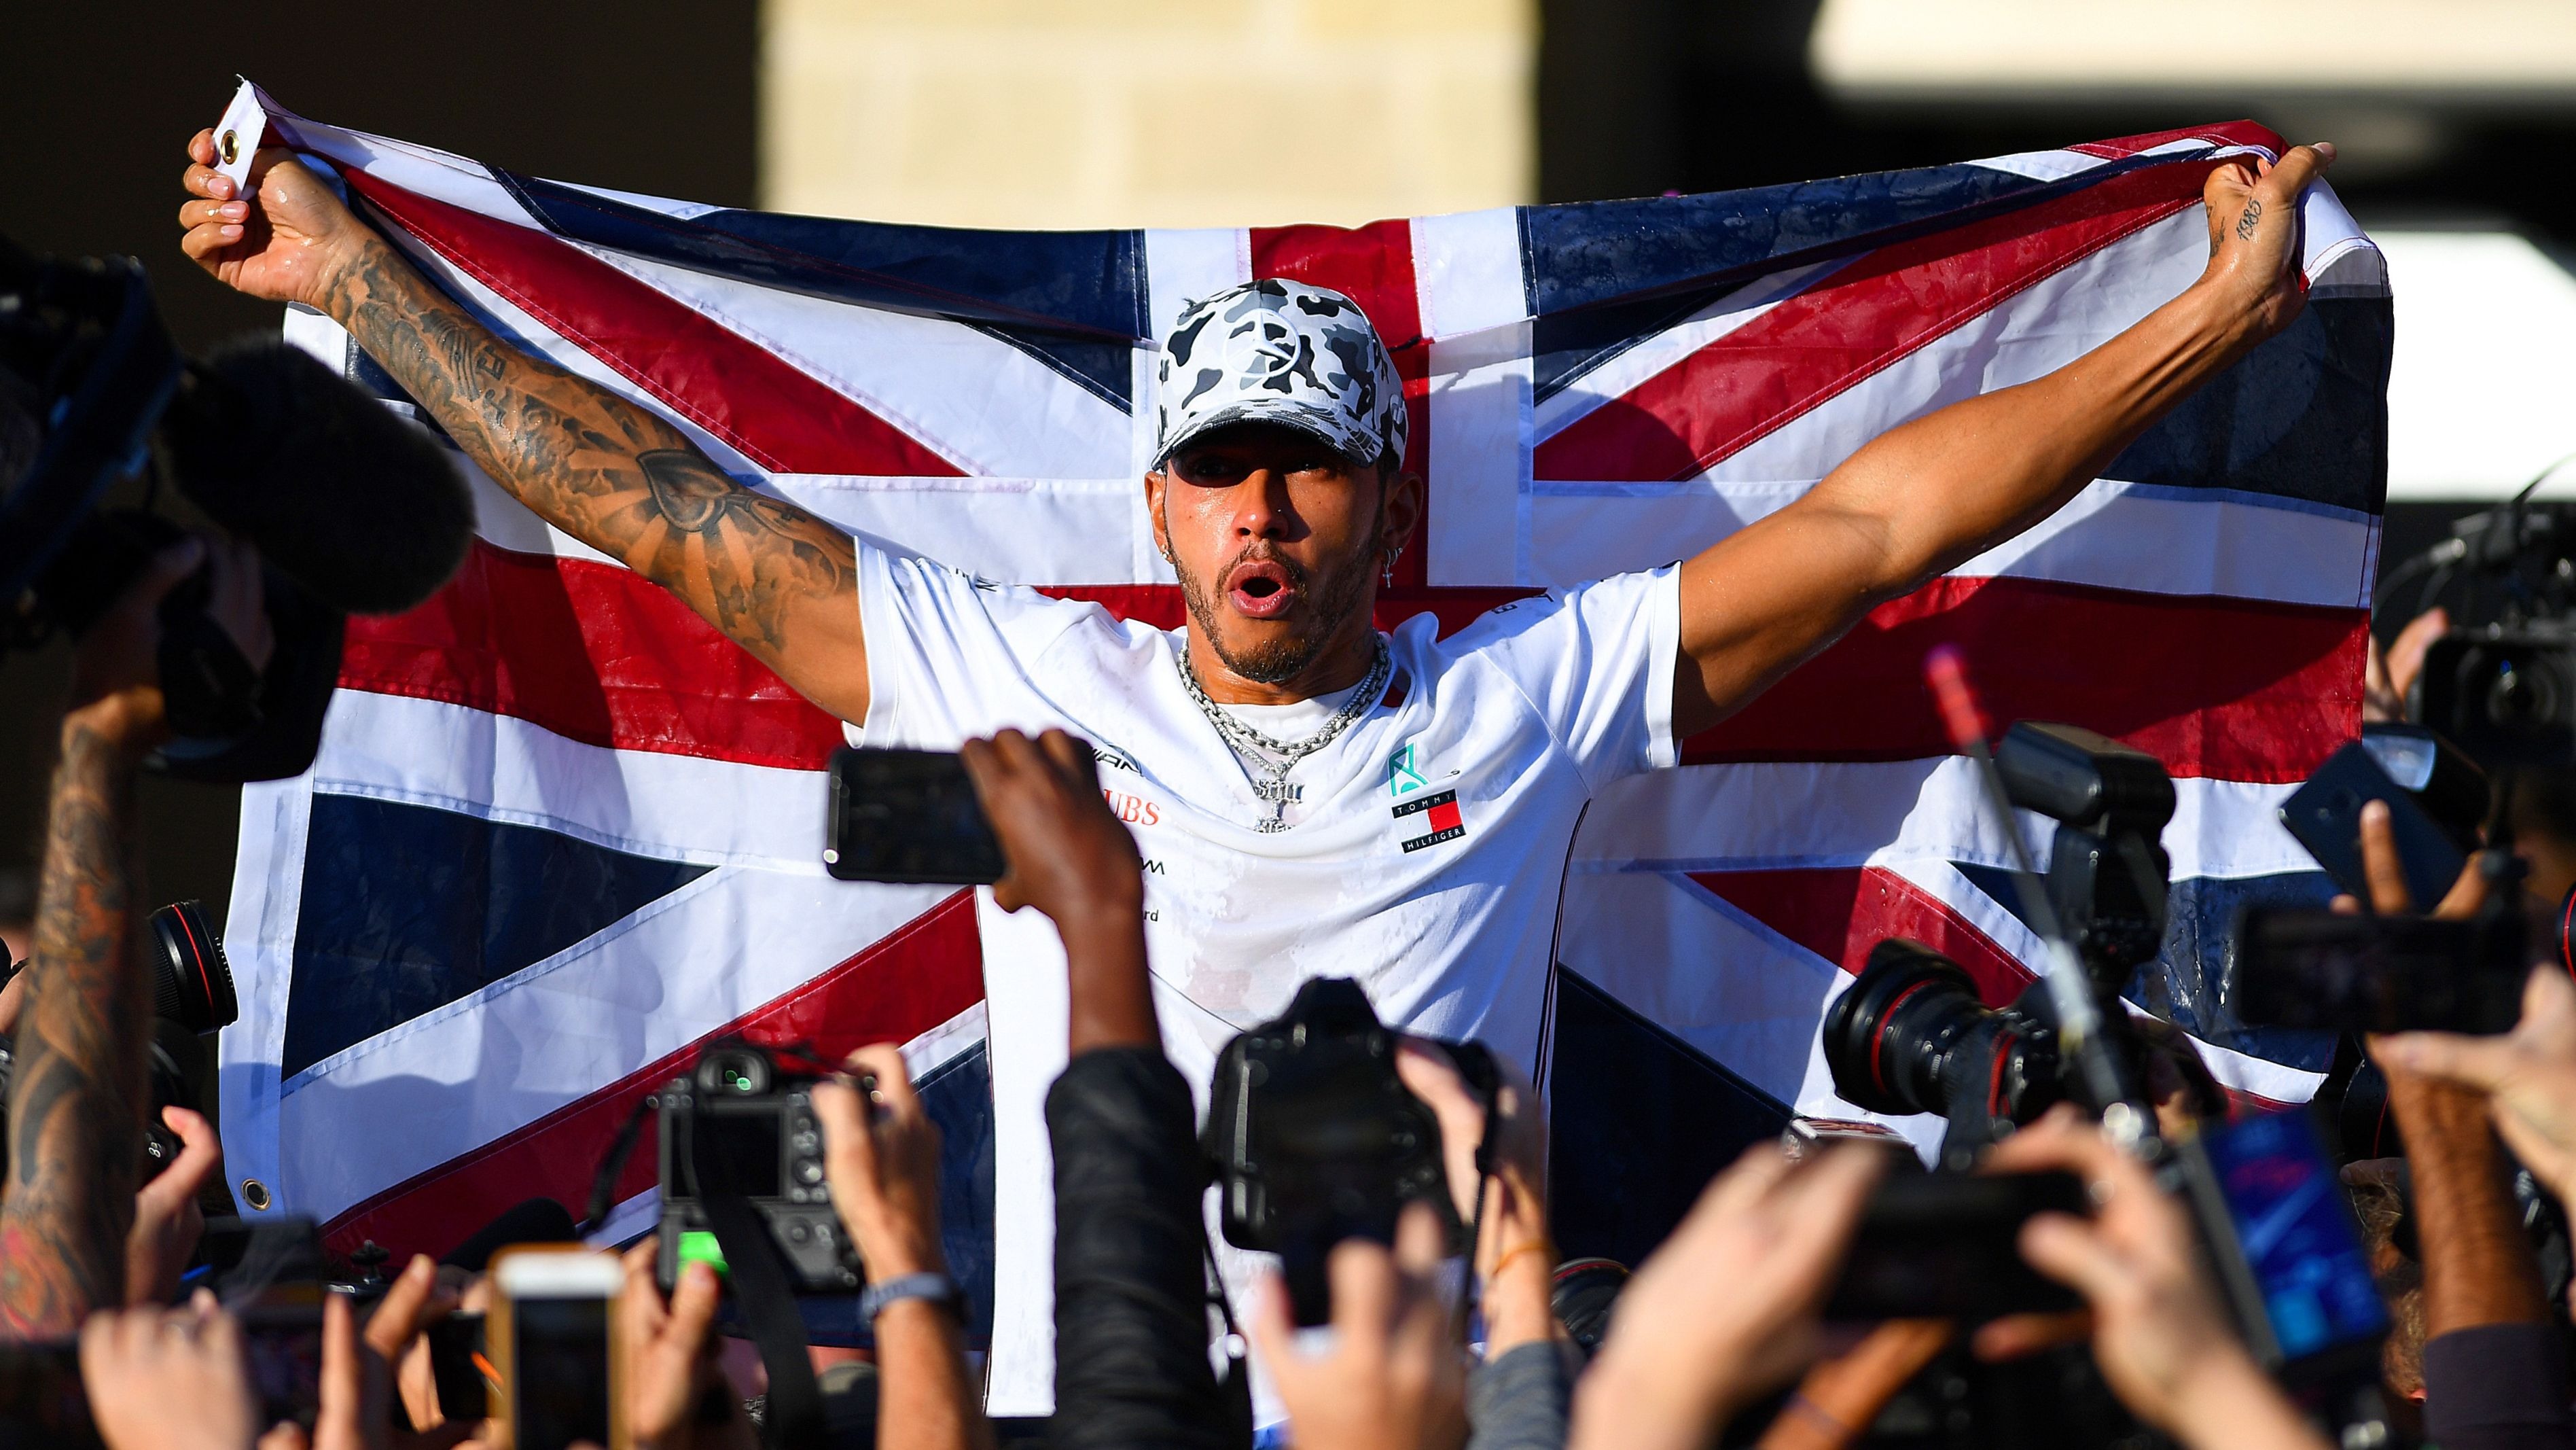 Lewis Hamilton sealed his sixth F1 world title after finishing second at the 2019 US Grand Prix 